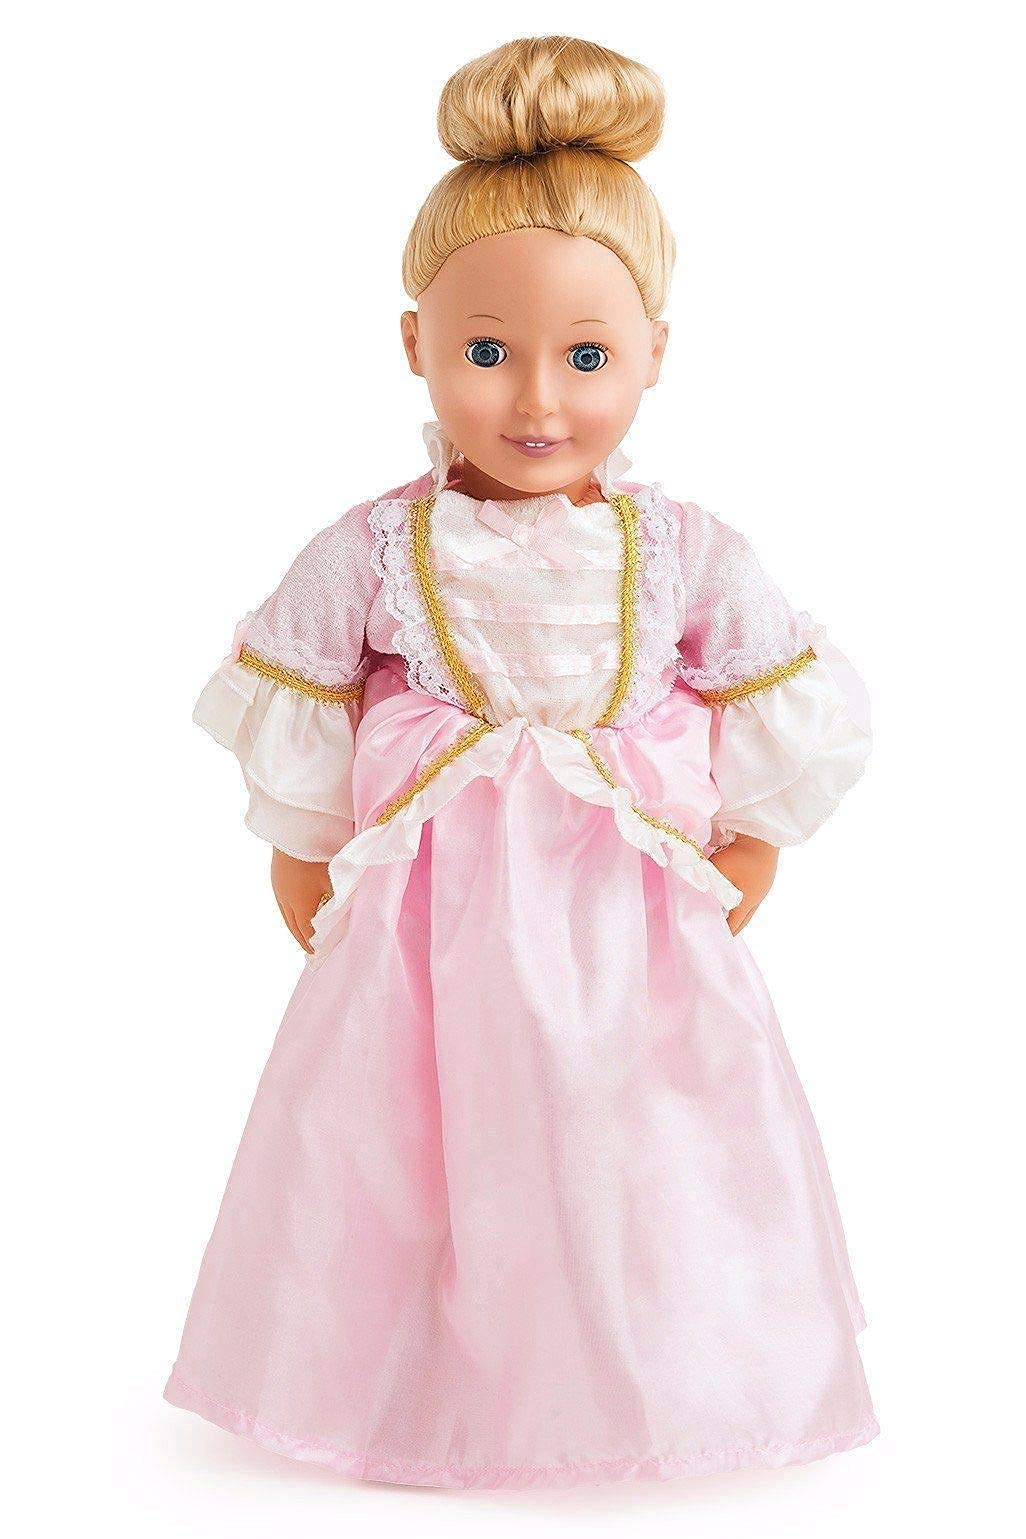 Little Adventures Pink Renaissance Princess Dress Up Costume (Medium Age 3-5) with Matching Doll Dres - Machine Washable Child Pretend Play and Party Dress with No Glitter